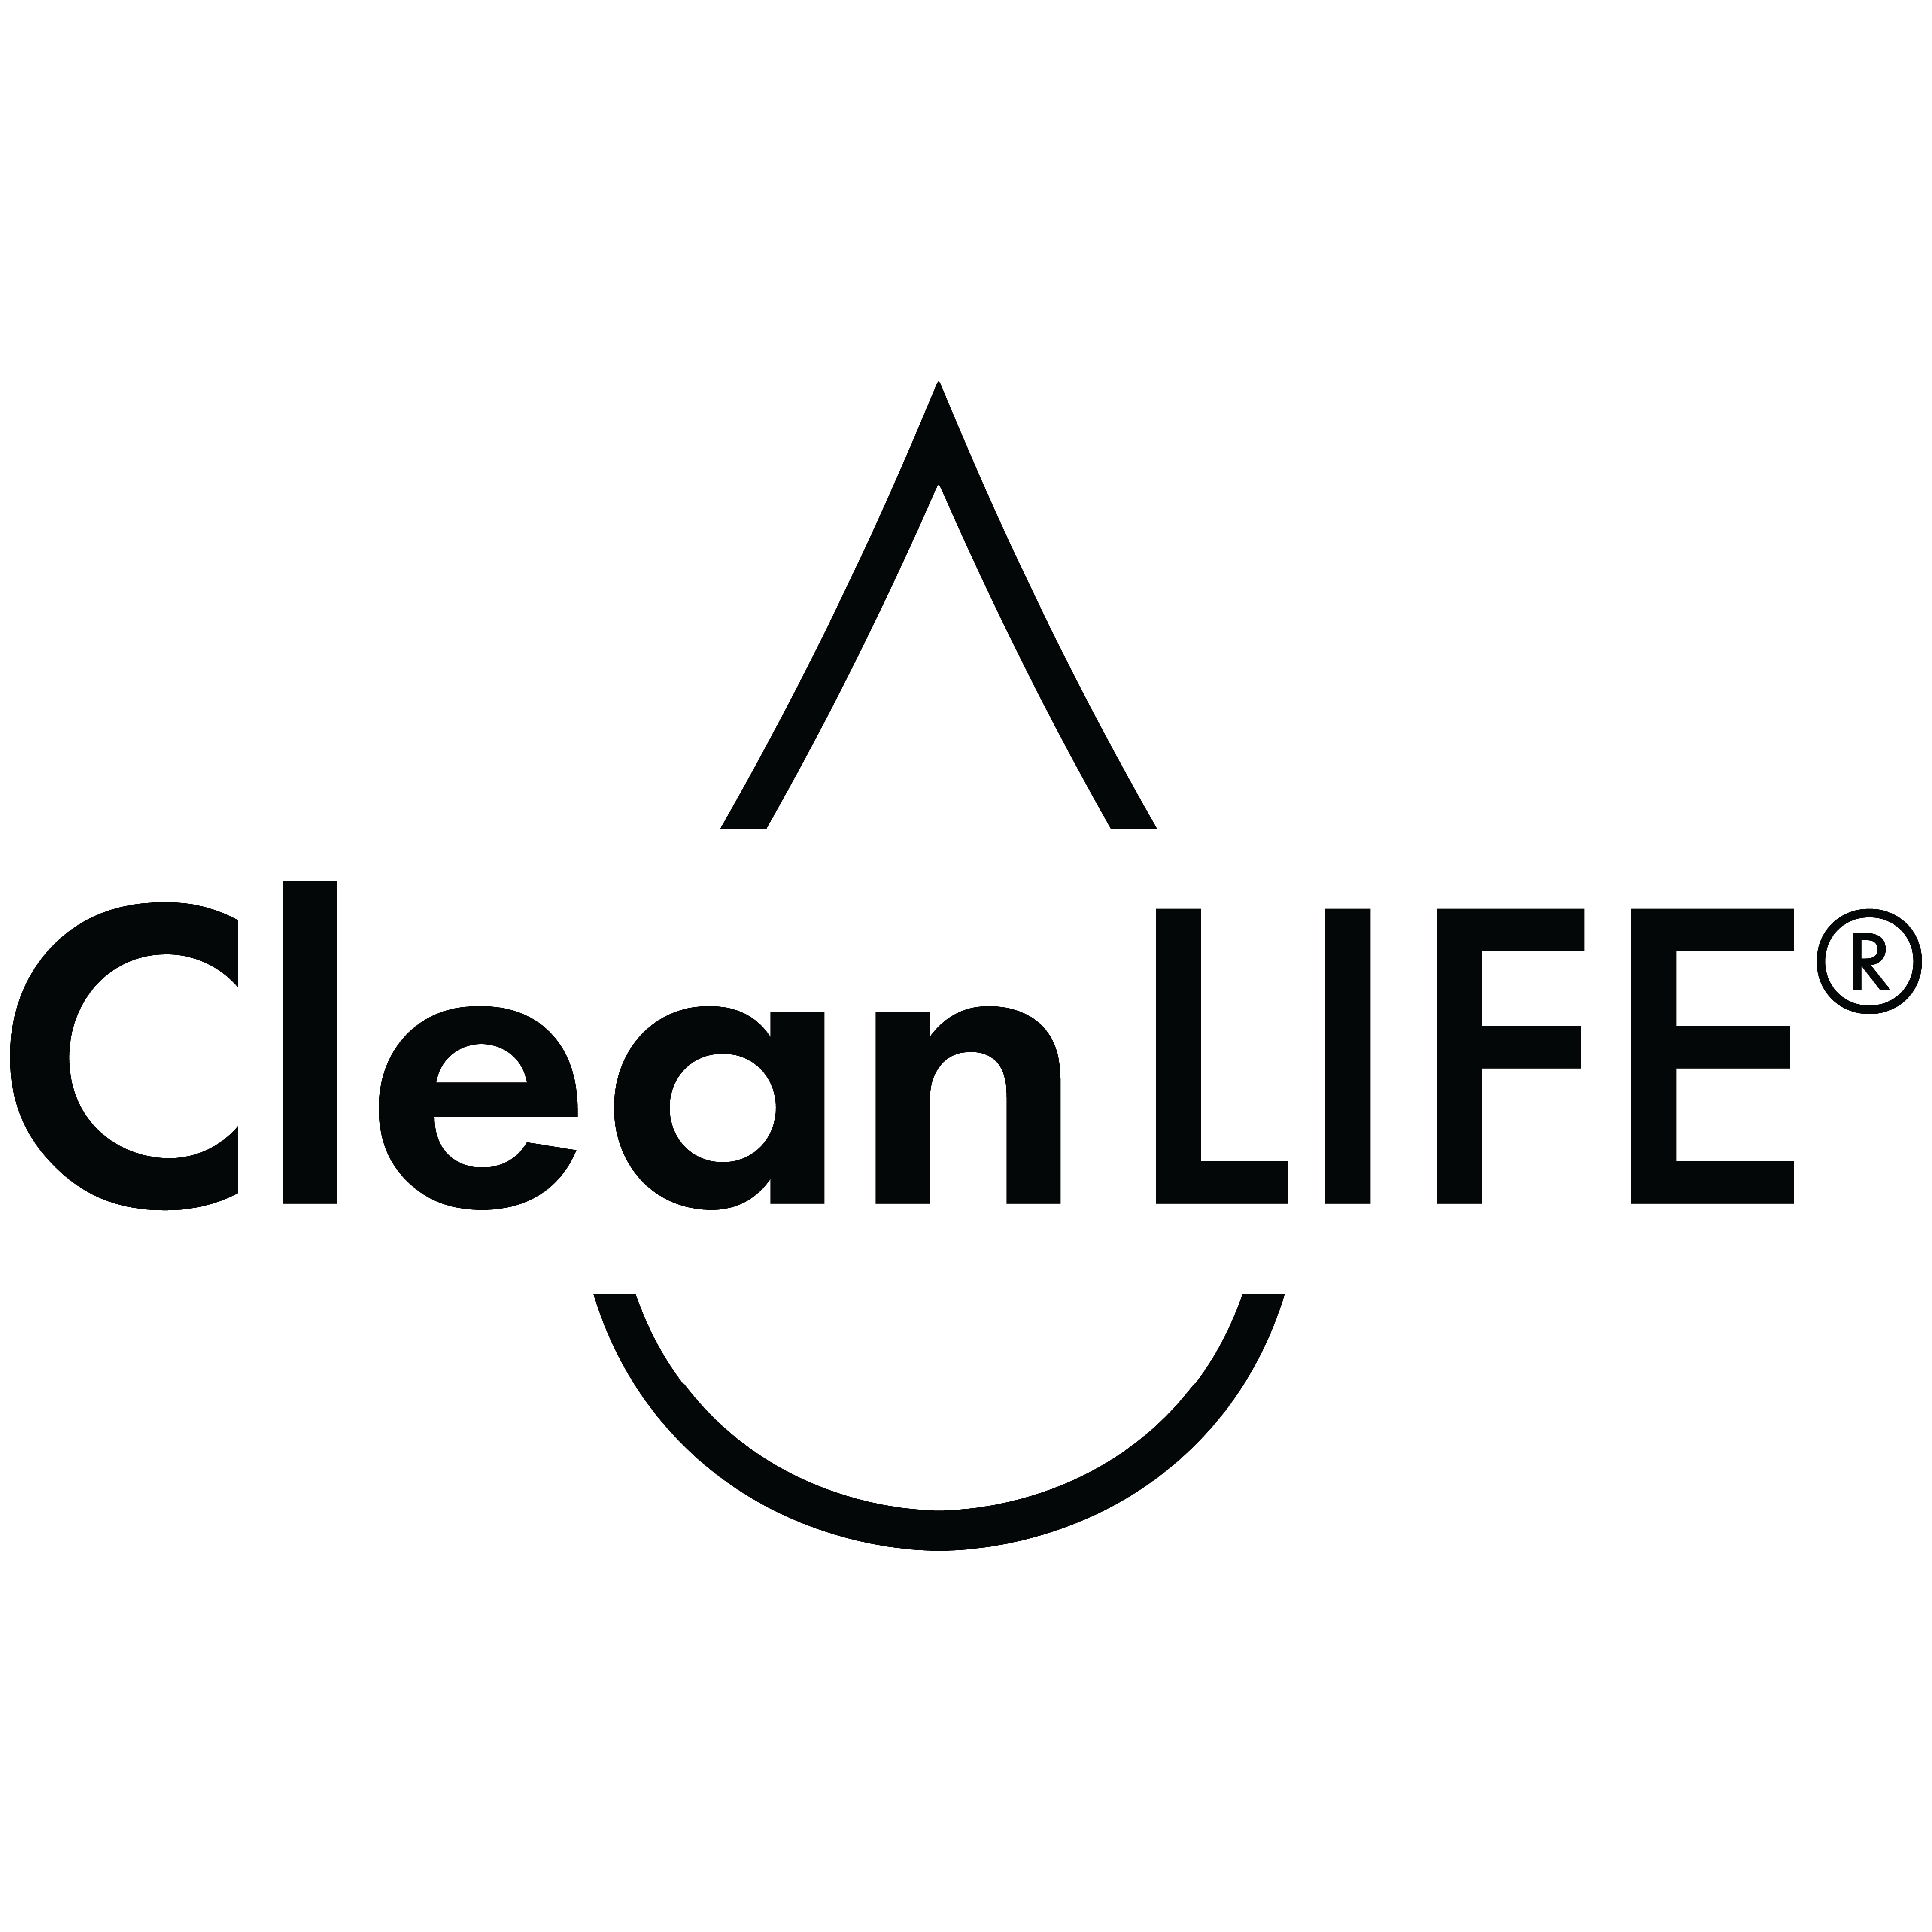 CleanLIFE